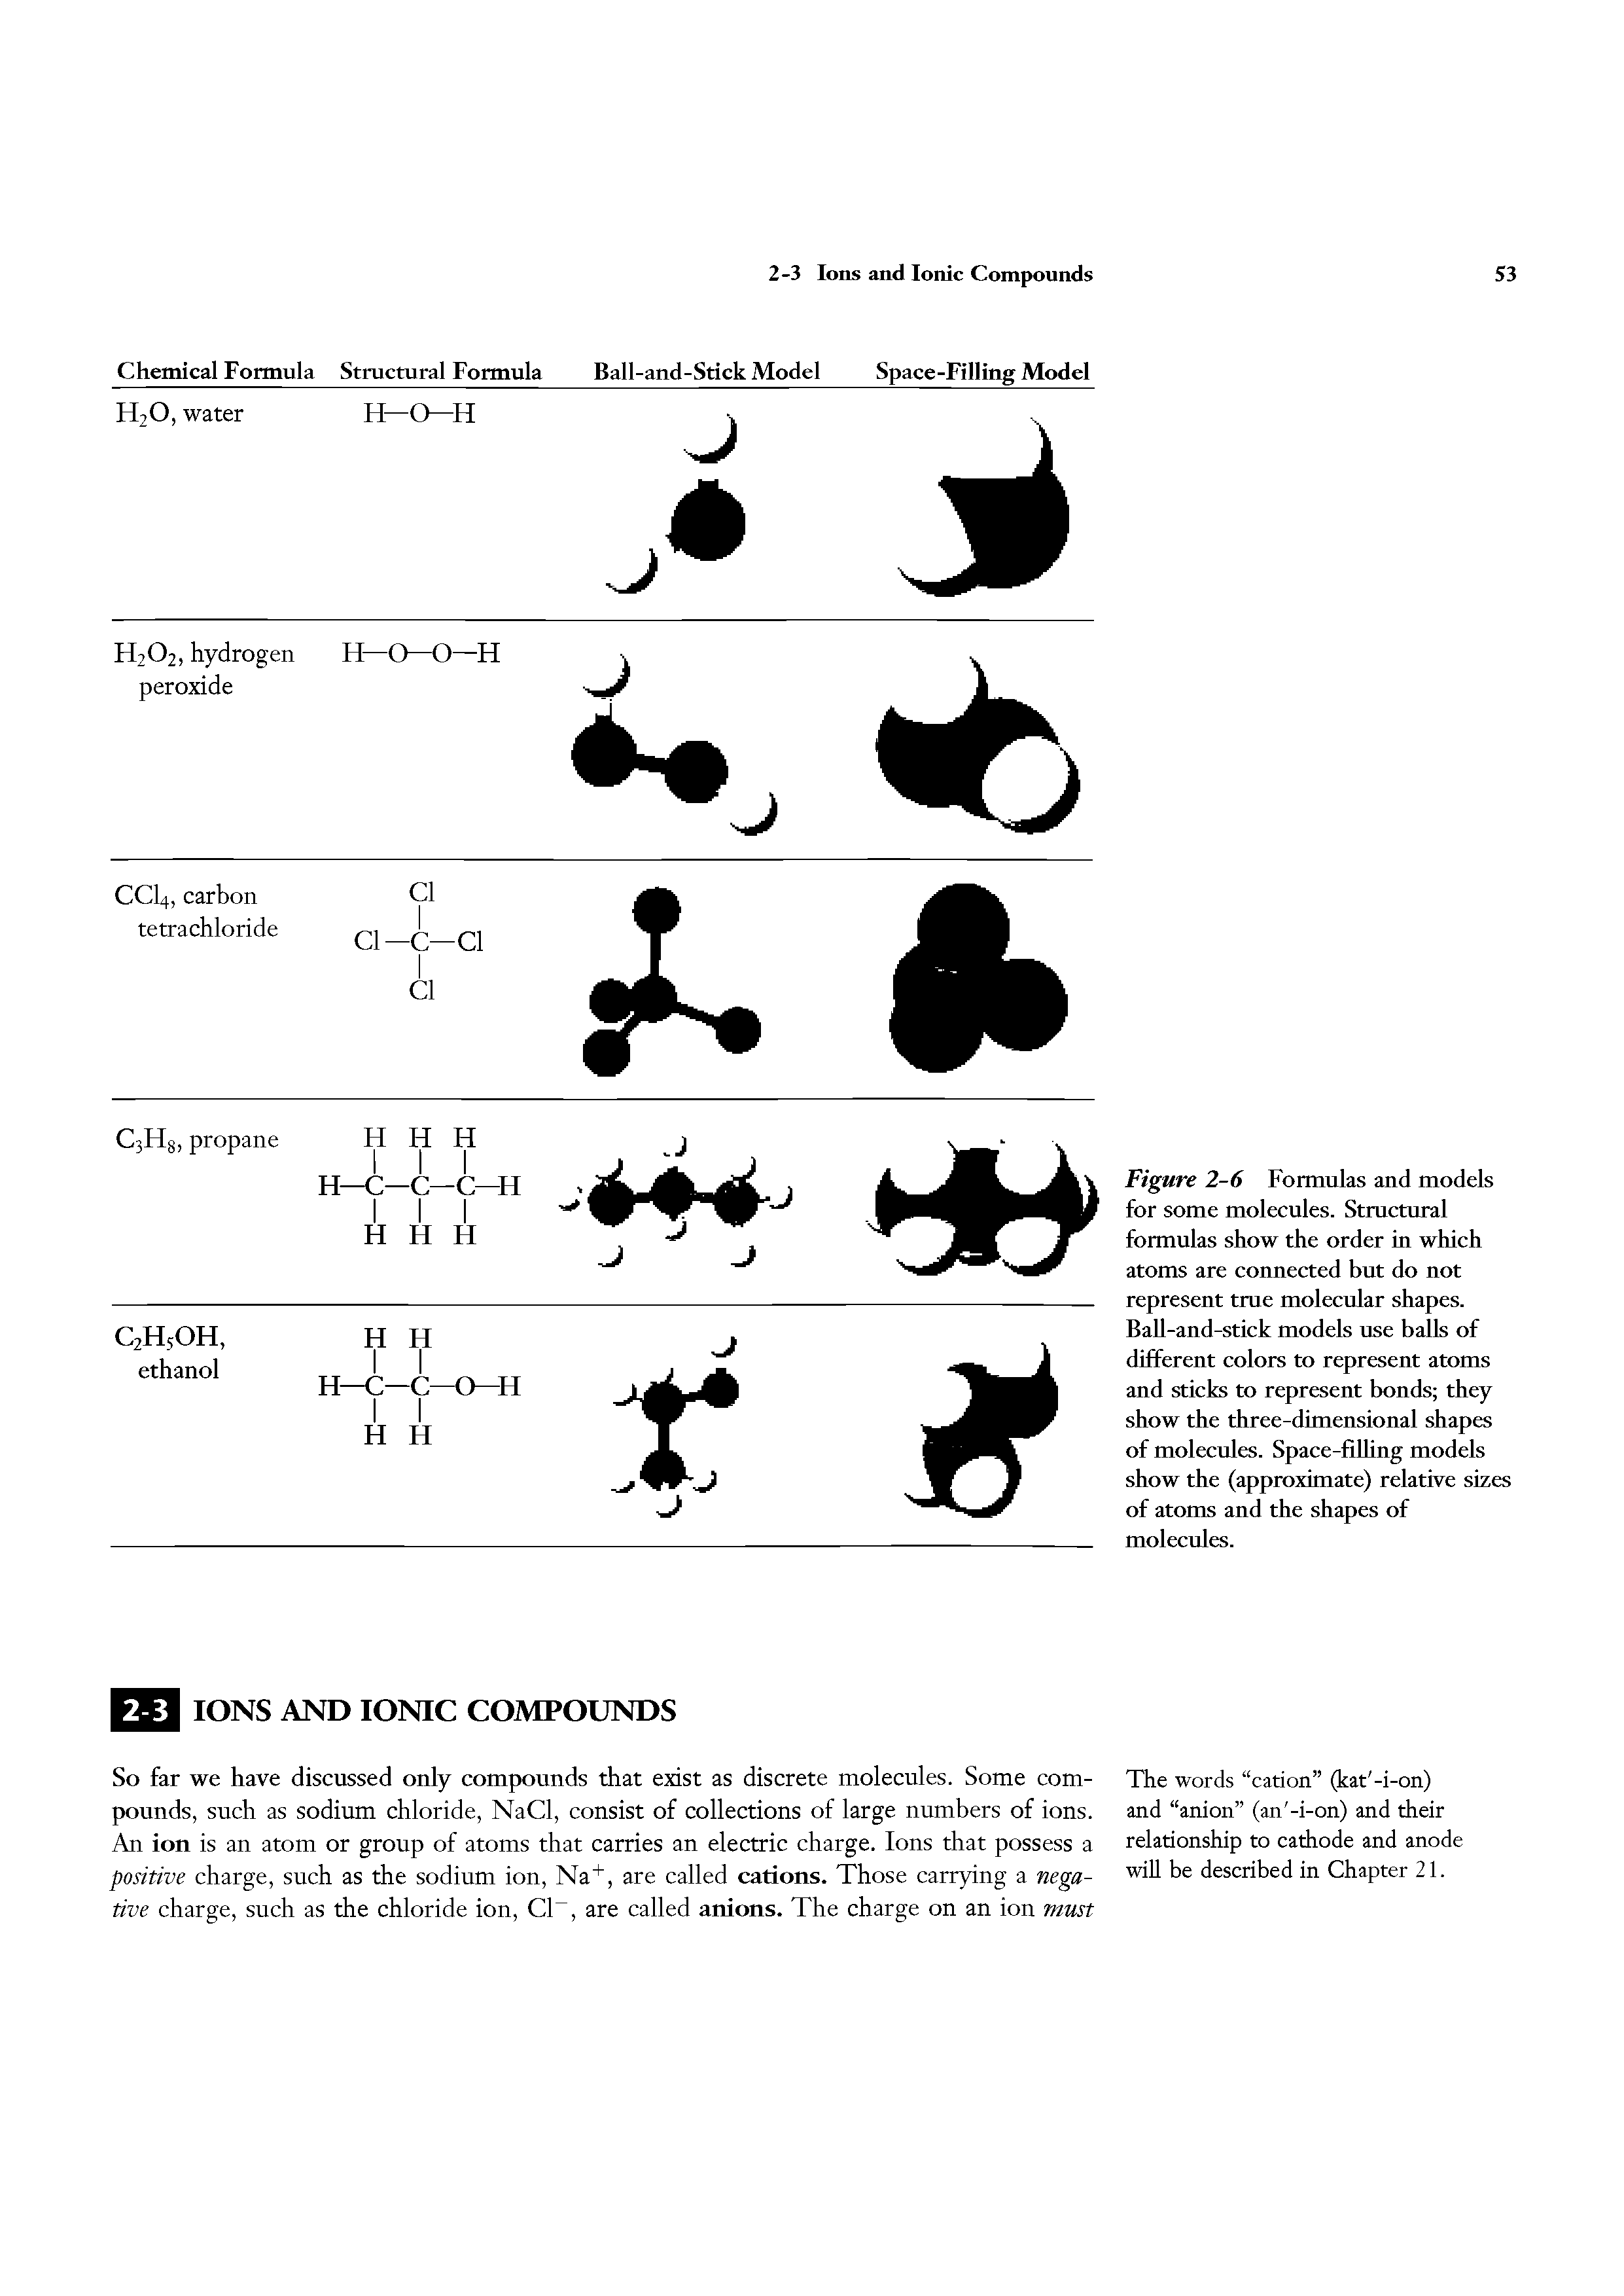 Figure 2-6 Formulas and models for some molecules. Structural formulas show the order in which atoms are connected but do not represent true molecular shapes. Ball-and-Stick models use balls of different colors to represent atoms and sticks to represent bonds they show the three-dimensional shapes of molecules. Space-fiUing models show the (approximate) relative sizes of atoms and the shapes of molecules.